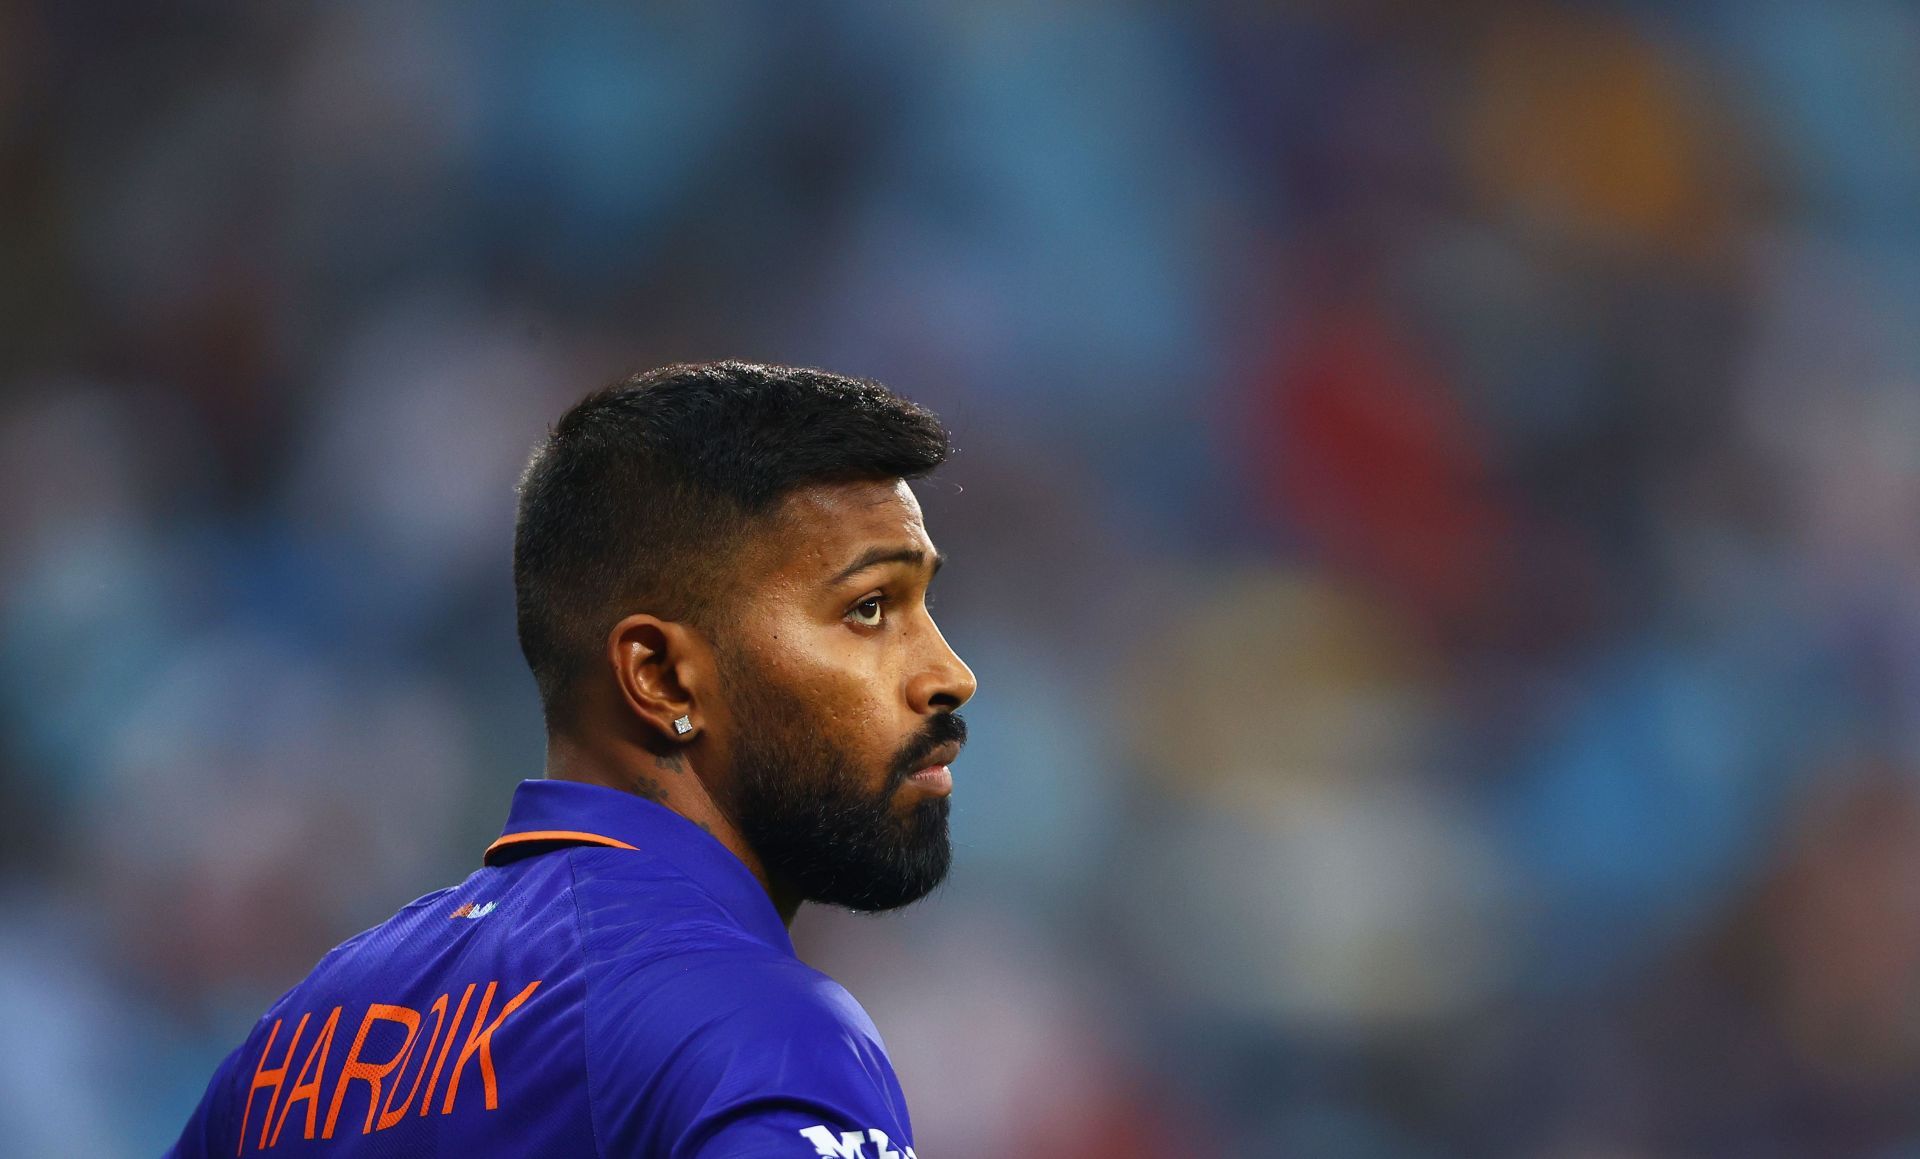 Gujarat Titans captain Hardik Pandya will need to lead by example (Getty Images)